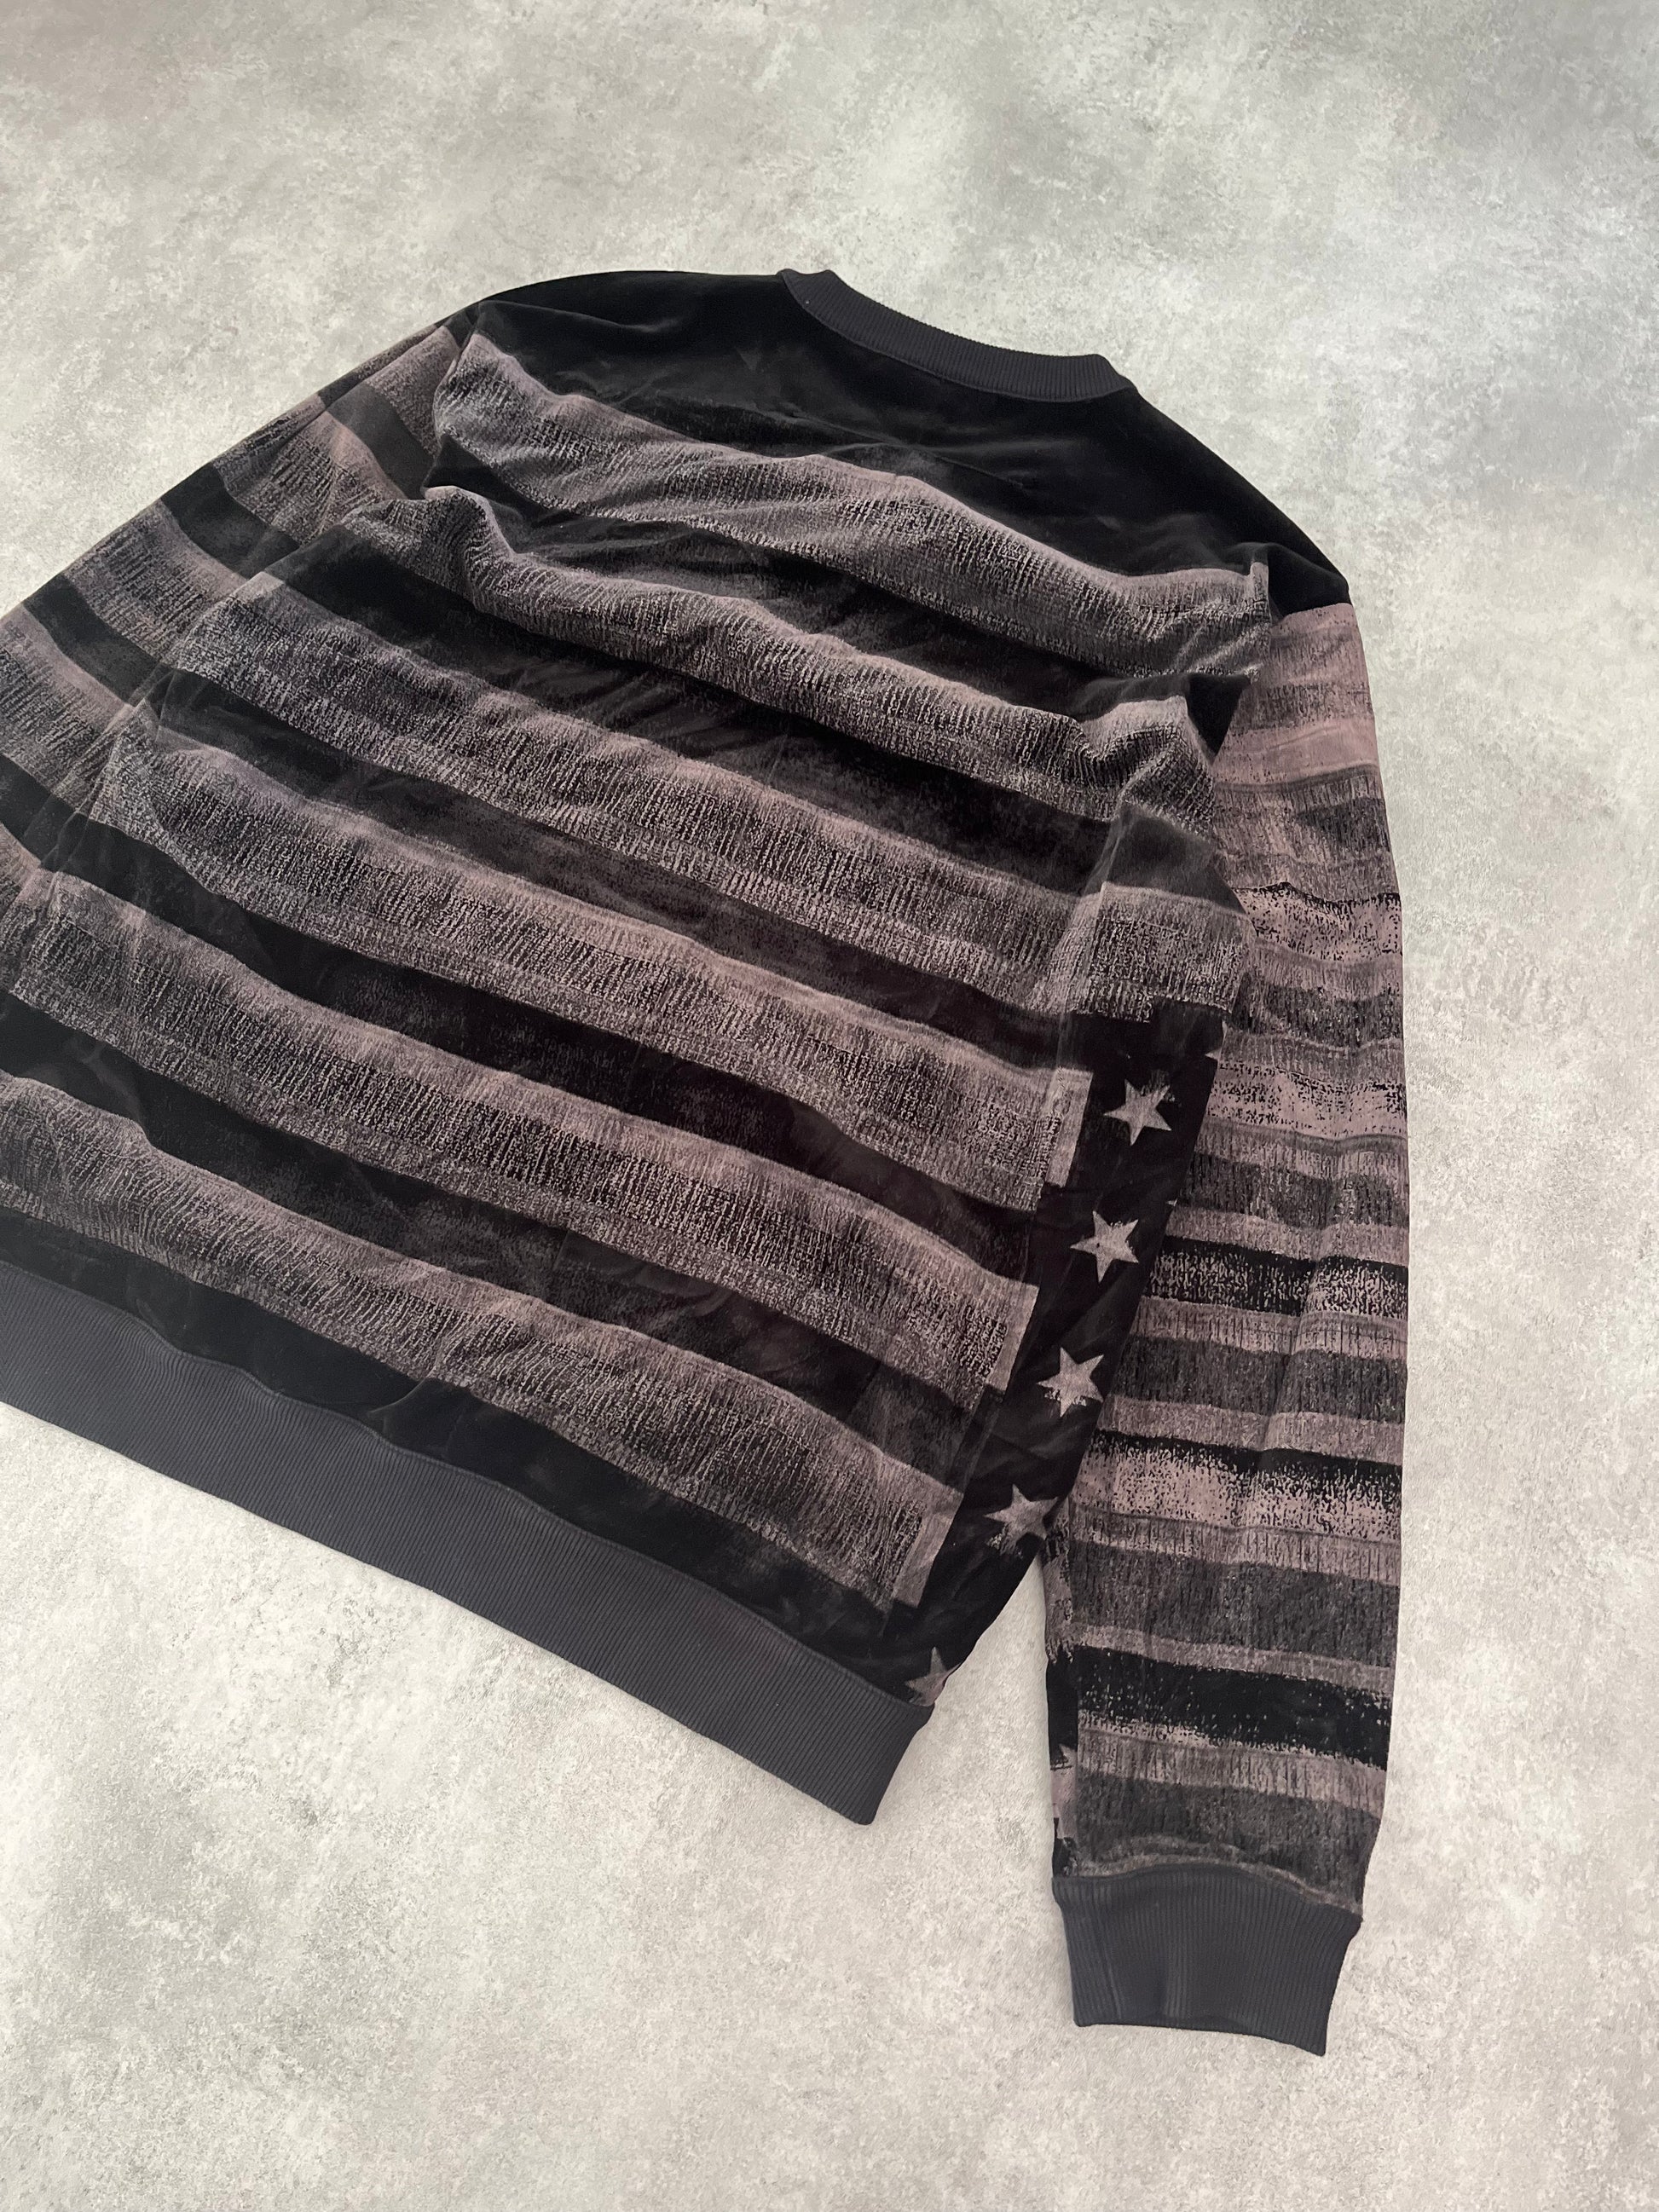 FW2013 Givenchy Shadow Flag Sweater (L) - 4